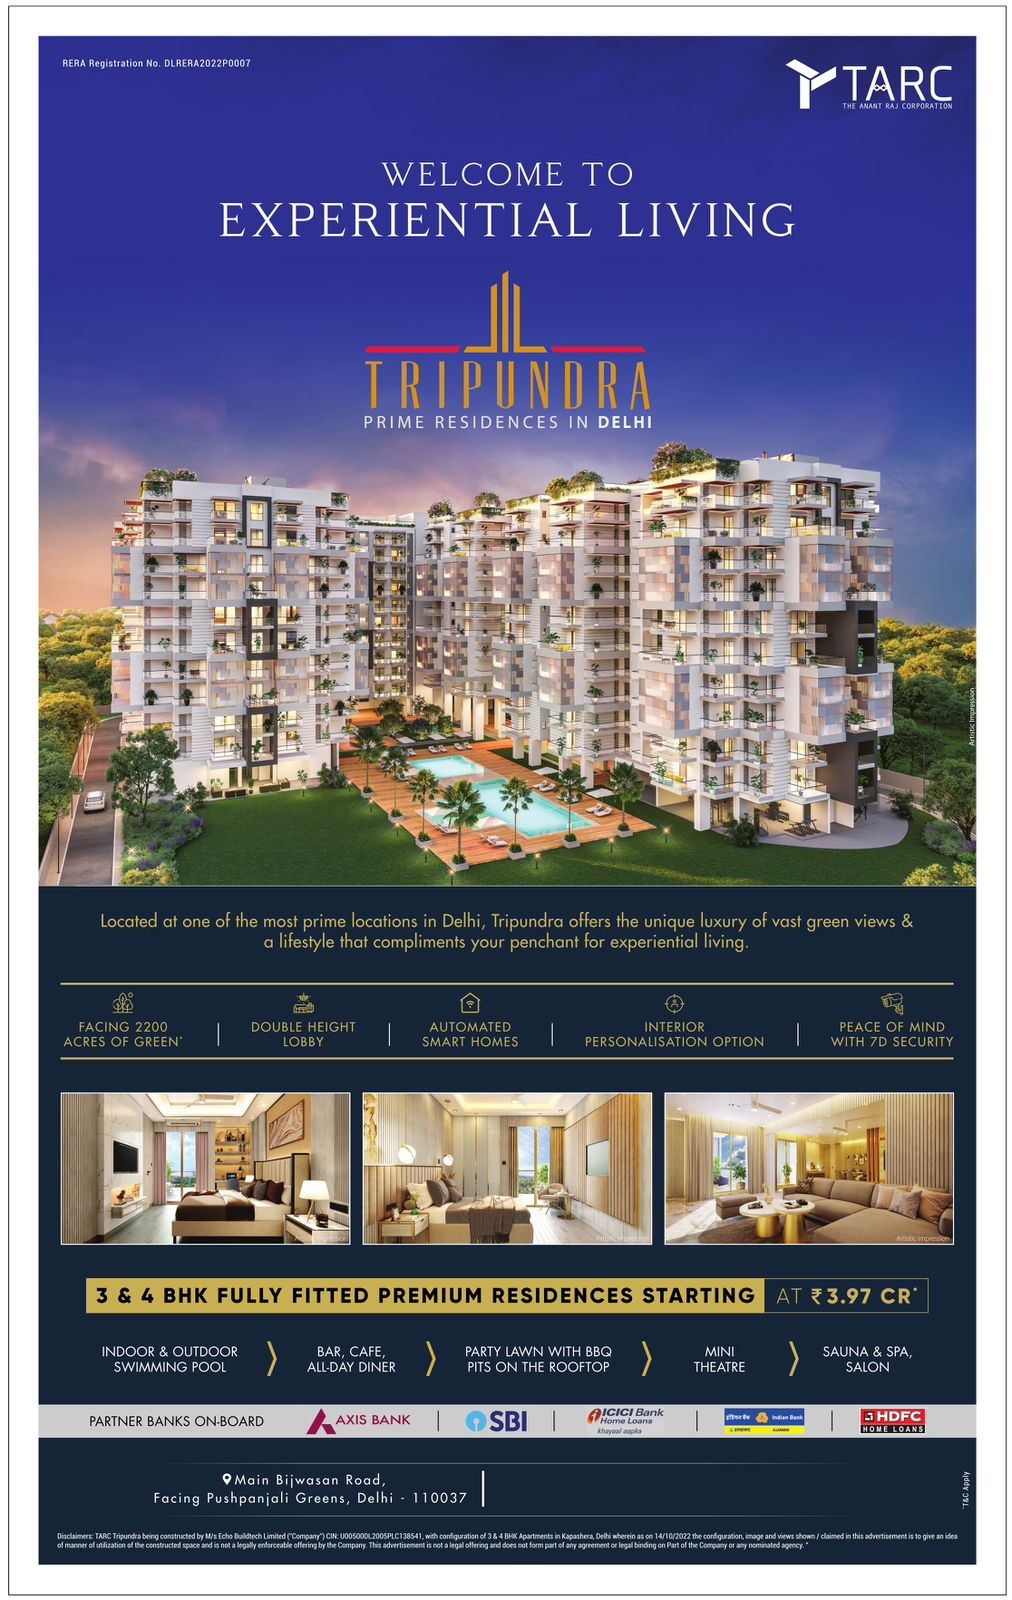 Tarc Tripundra Presenting 3 and 4 BHK premium residences price staring Rs 3.97 Cr. in New Delhi Update